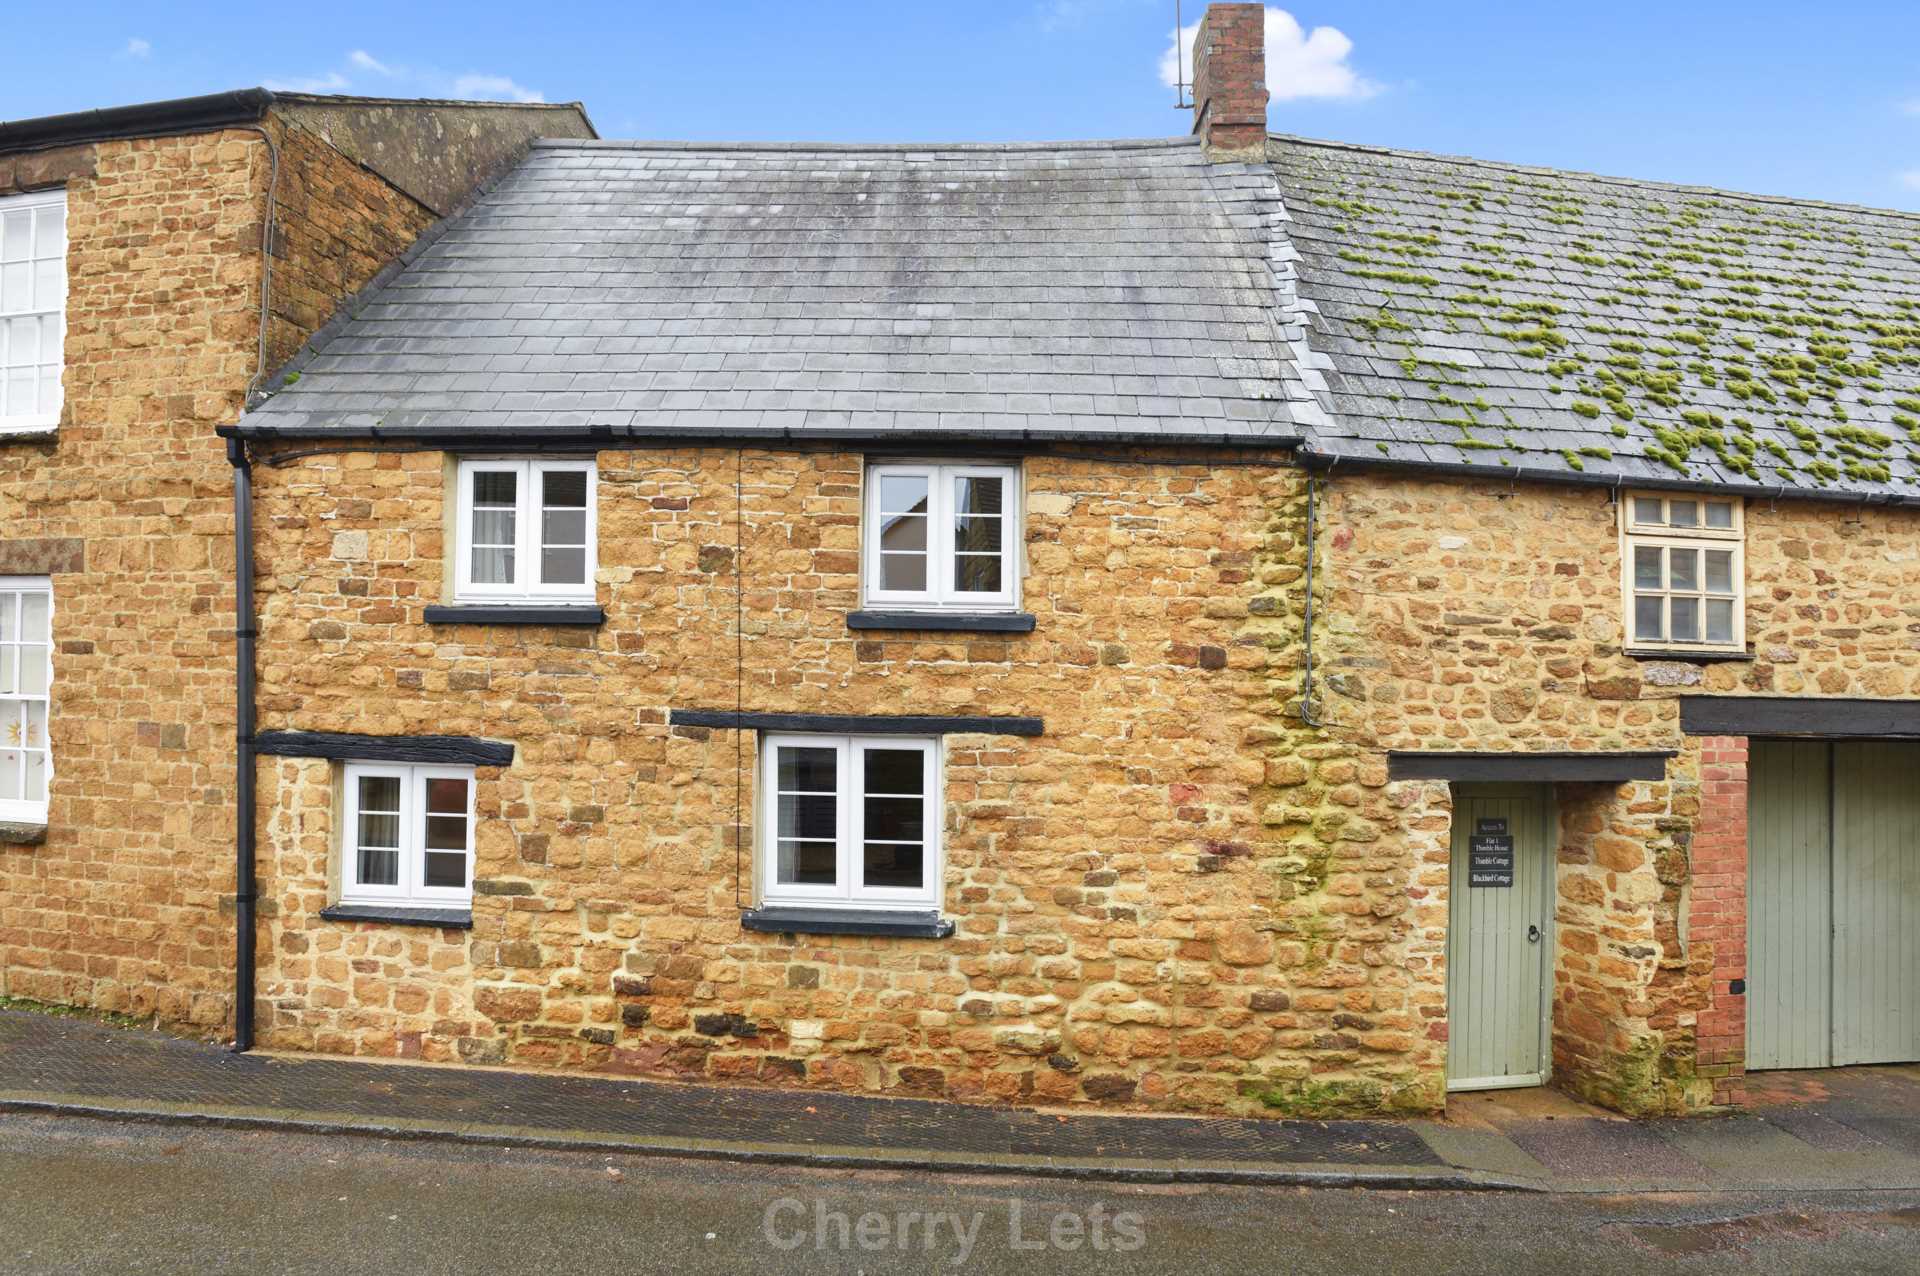 2 bed cottage to rent - Property Image 1